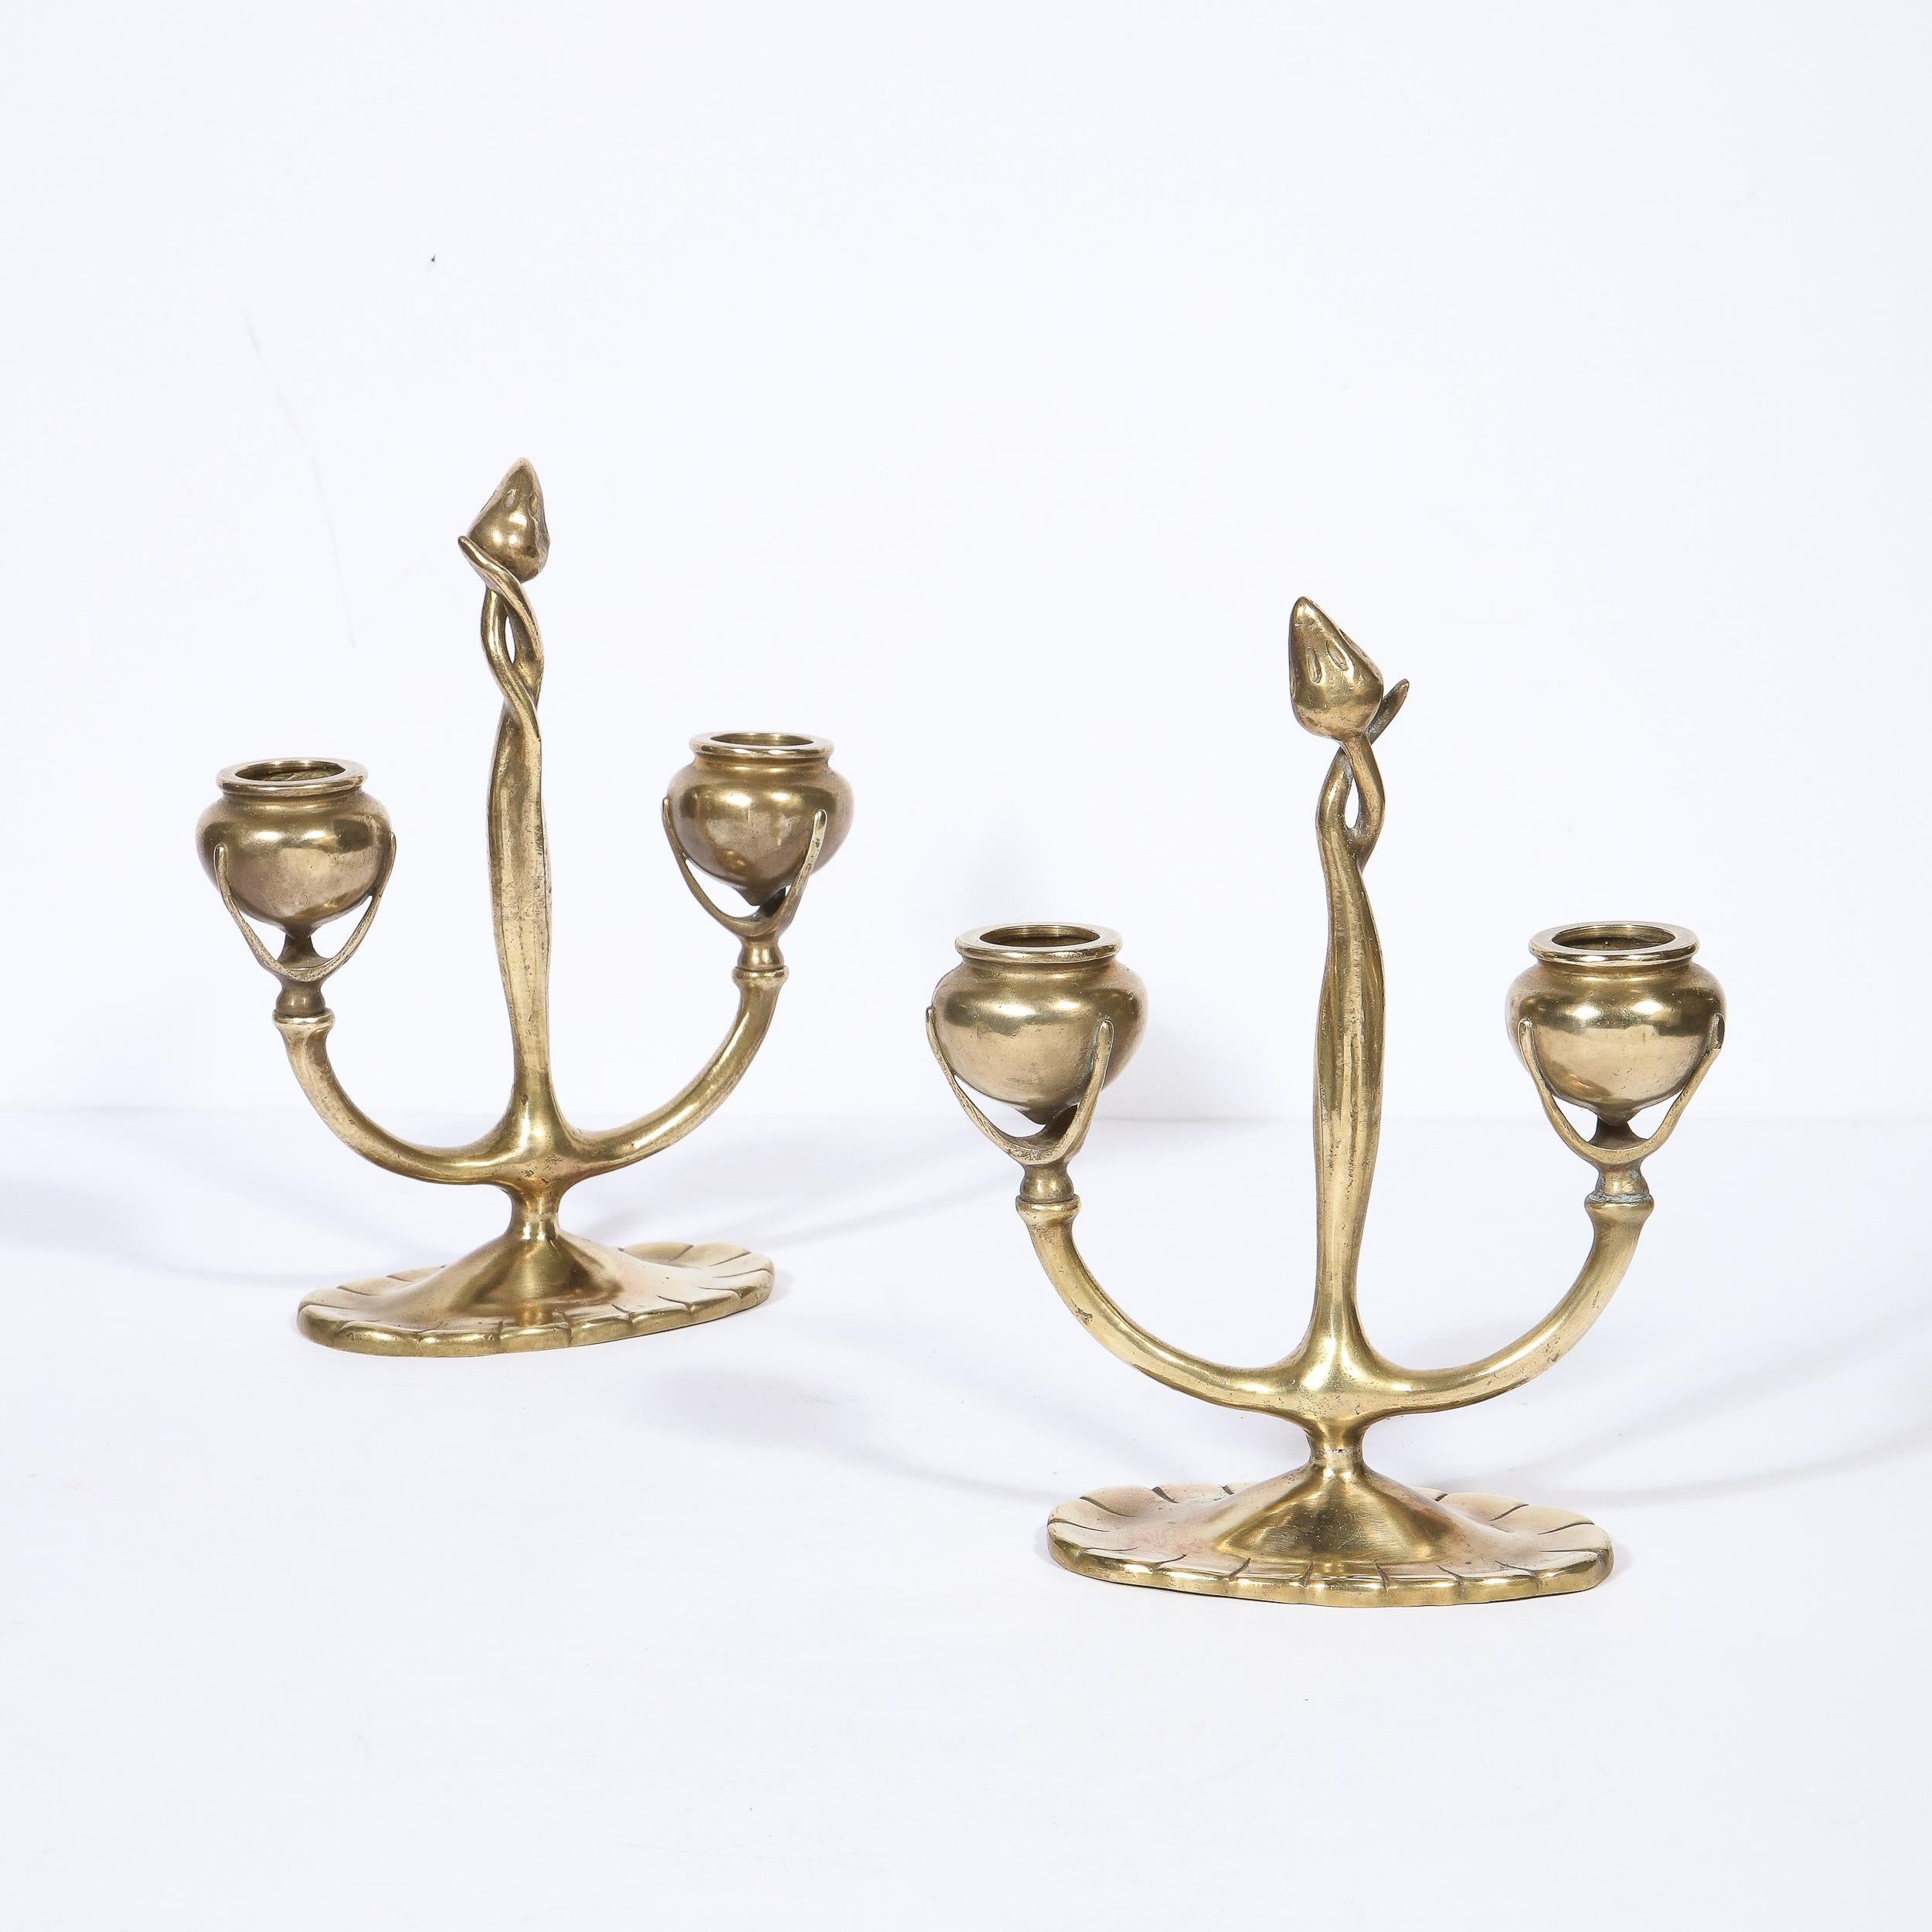 Early 20th Century Pair of Art Nouveau Bronze Sculptural Floral Candelabras Signed Tiffany Studios For Sale